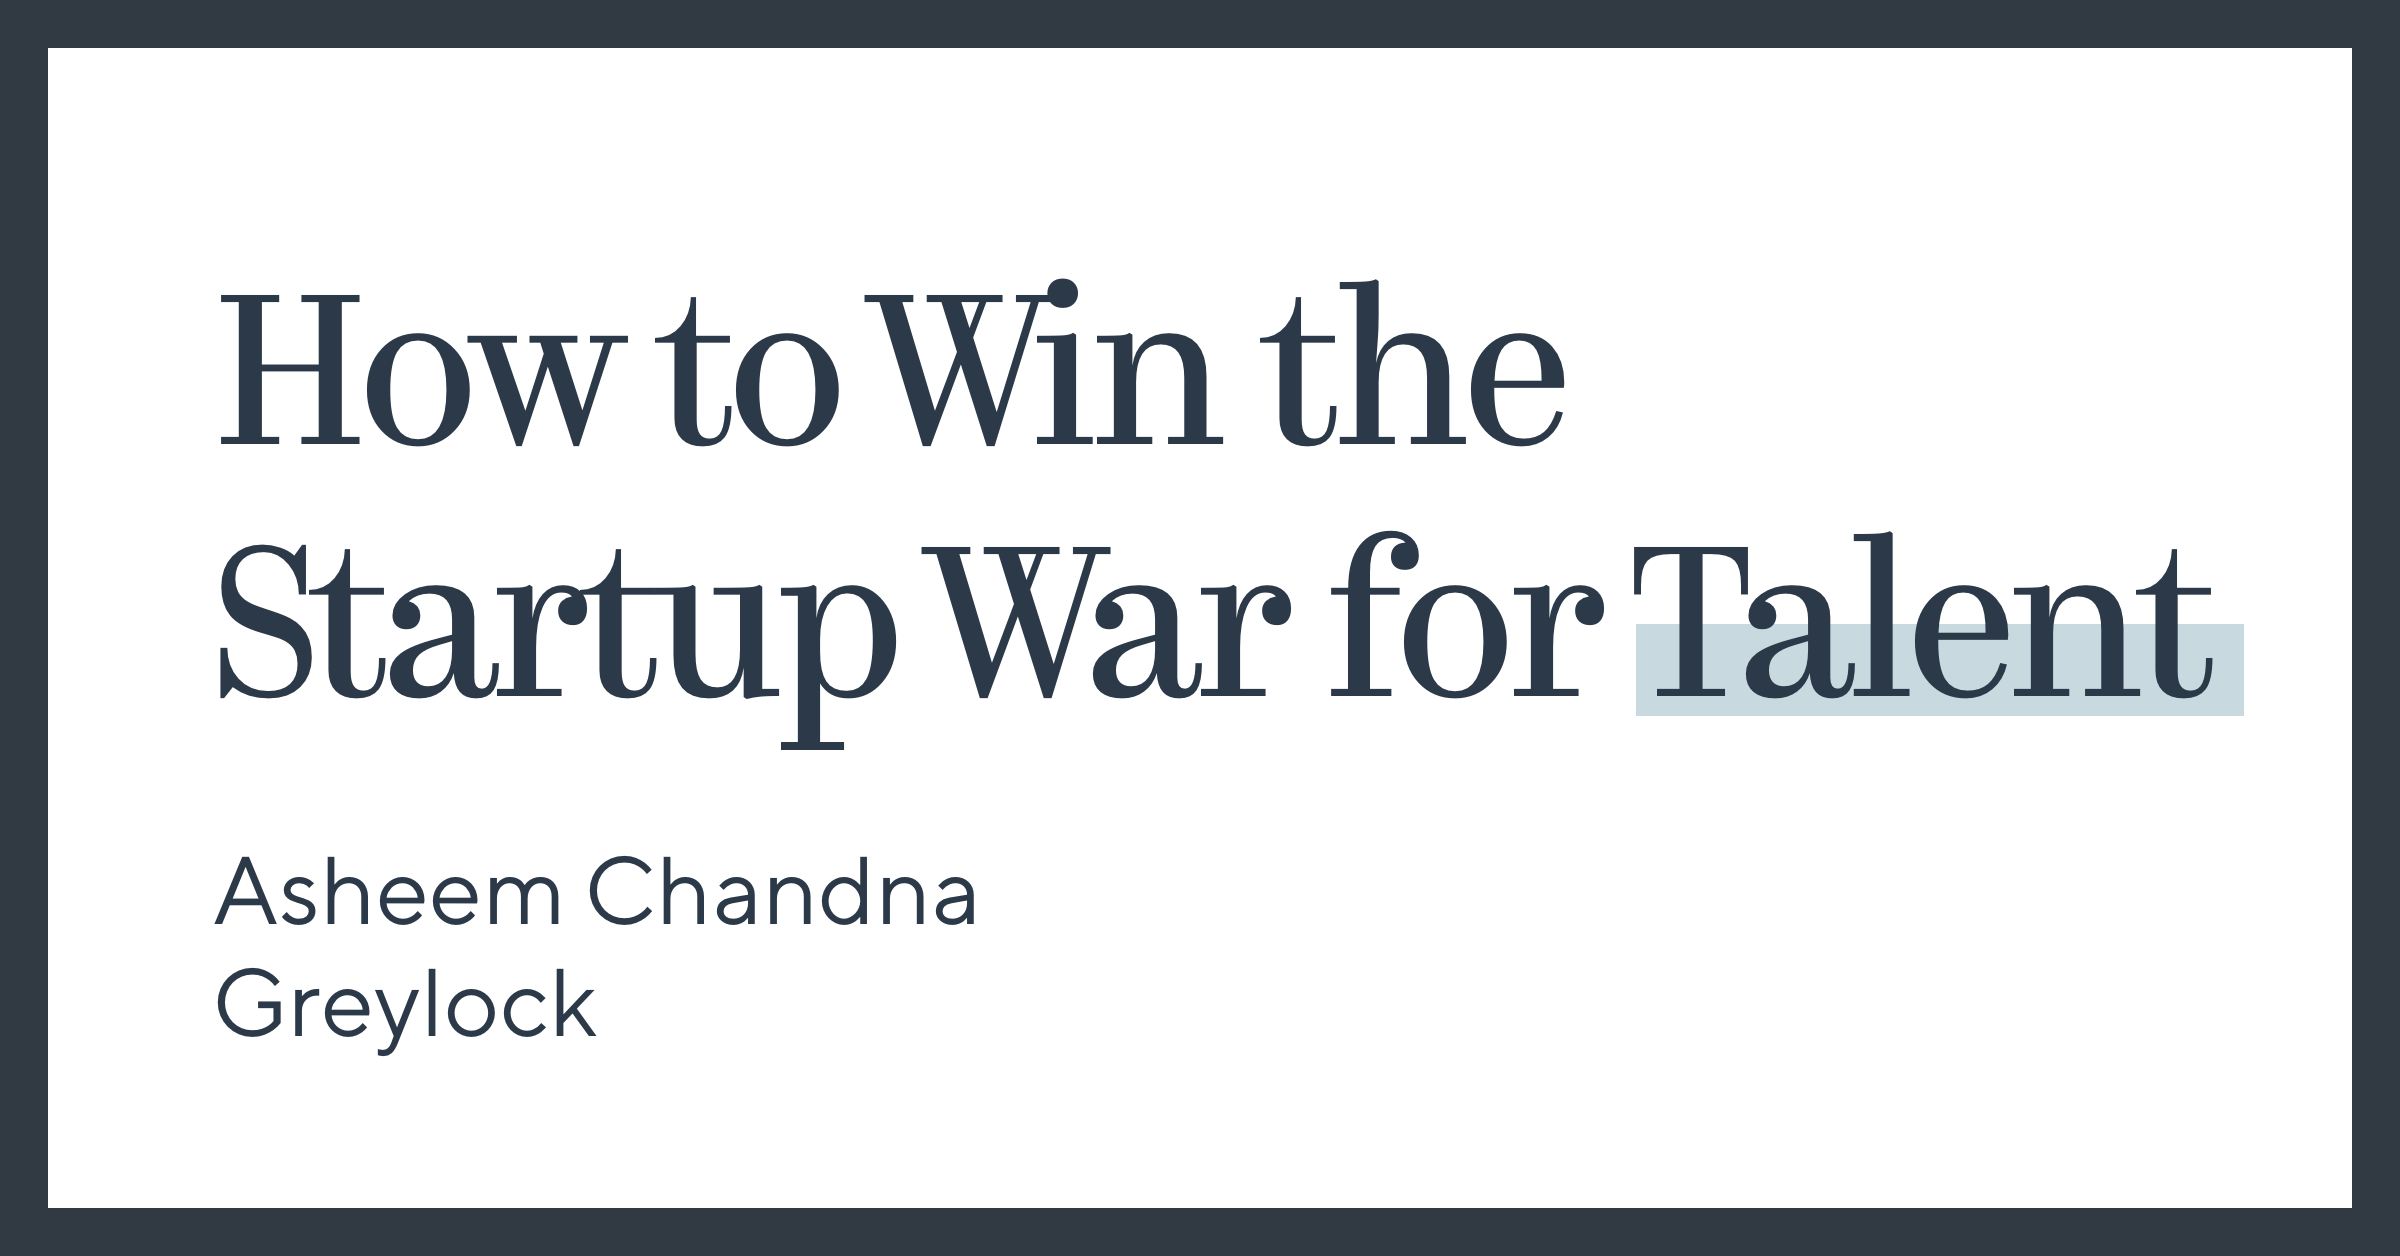 How to Win the Startup War for Talent